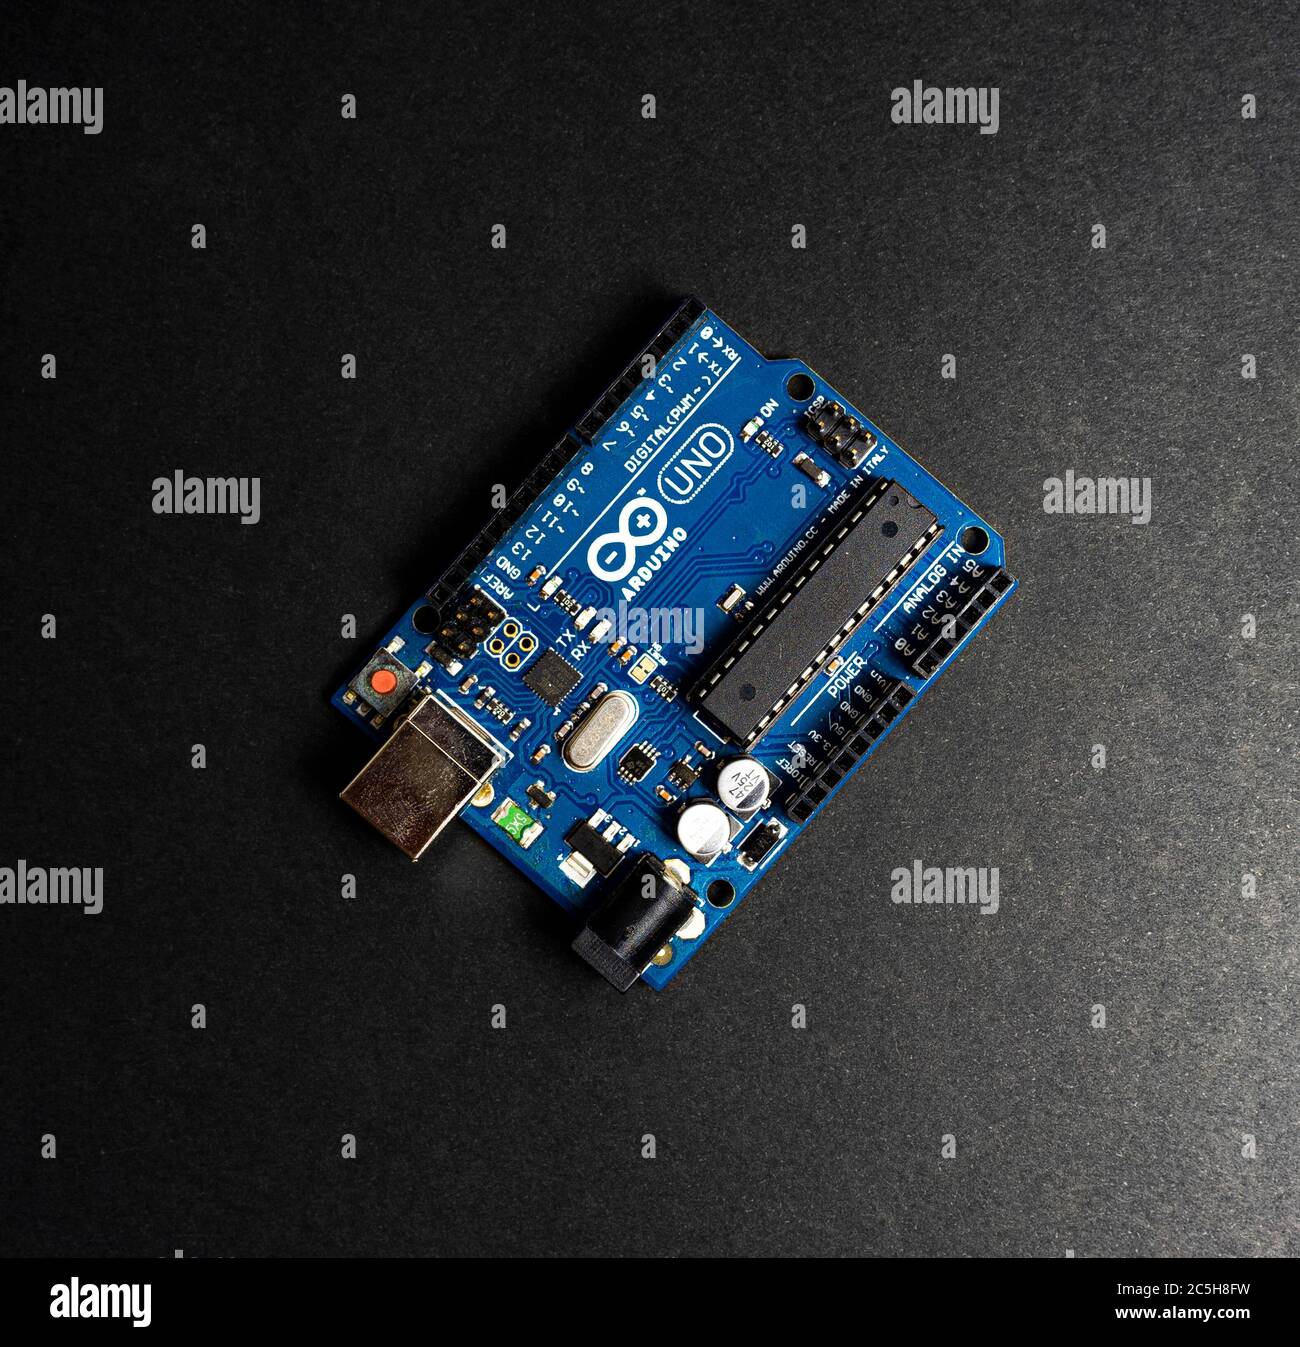 Sankt-Petersburg, Russia - February 28, 2020: Arduino UNO board on black background, close up. Microcontroller for programming. Stock Photo